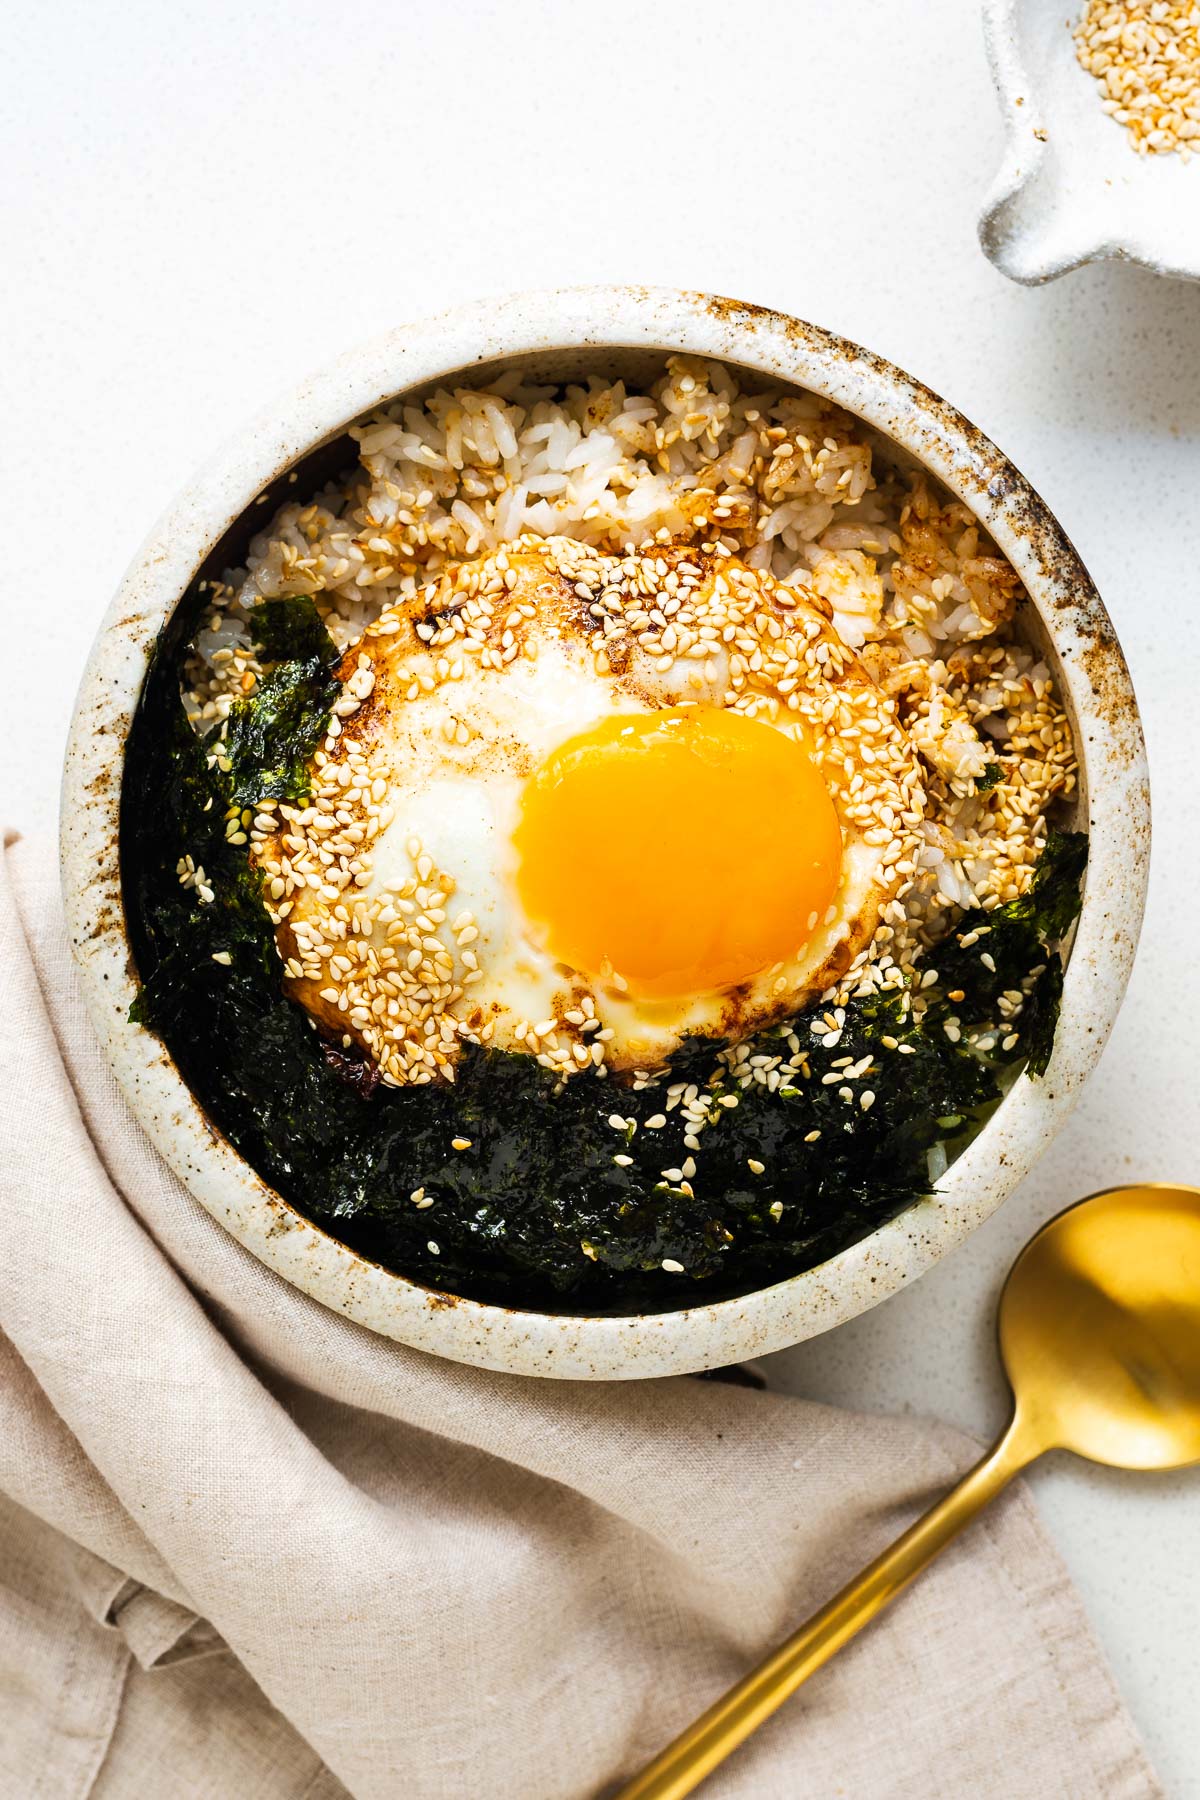 A soy sauce fried egg on rice with crushed gim (roasted seaweed) and sesame seeds in a ceramic bowl.